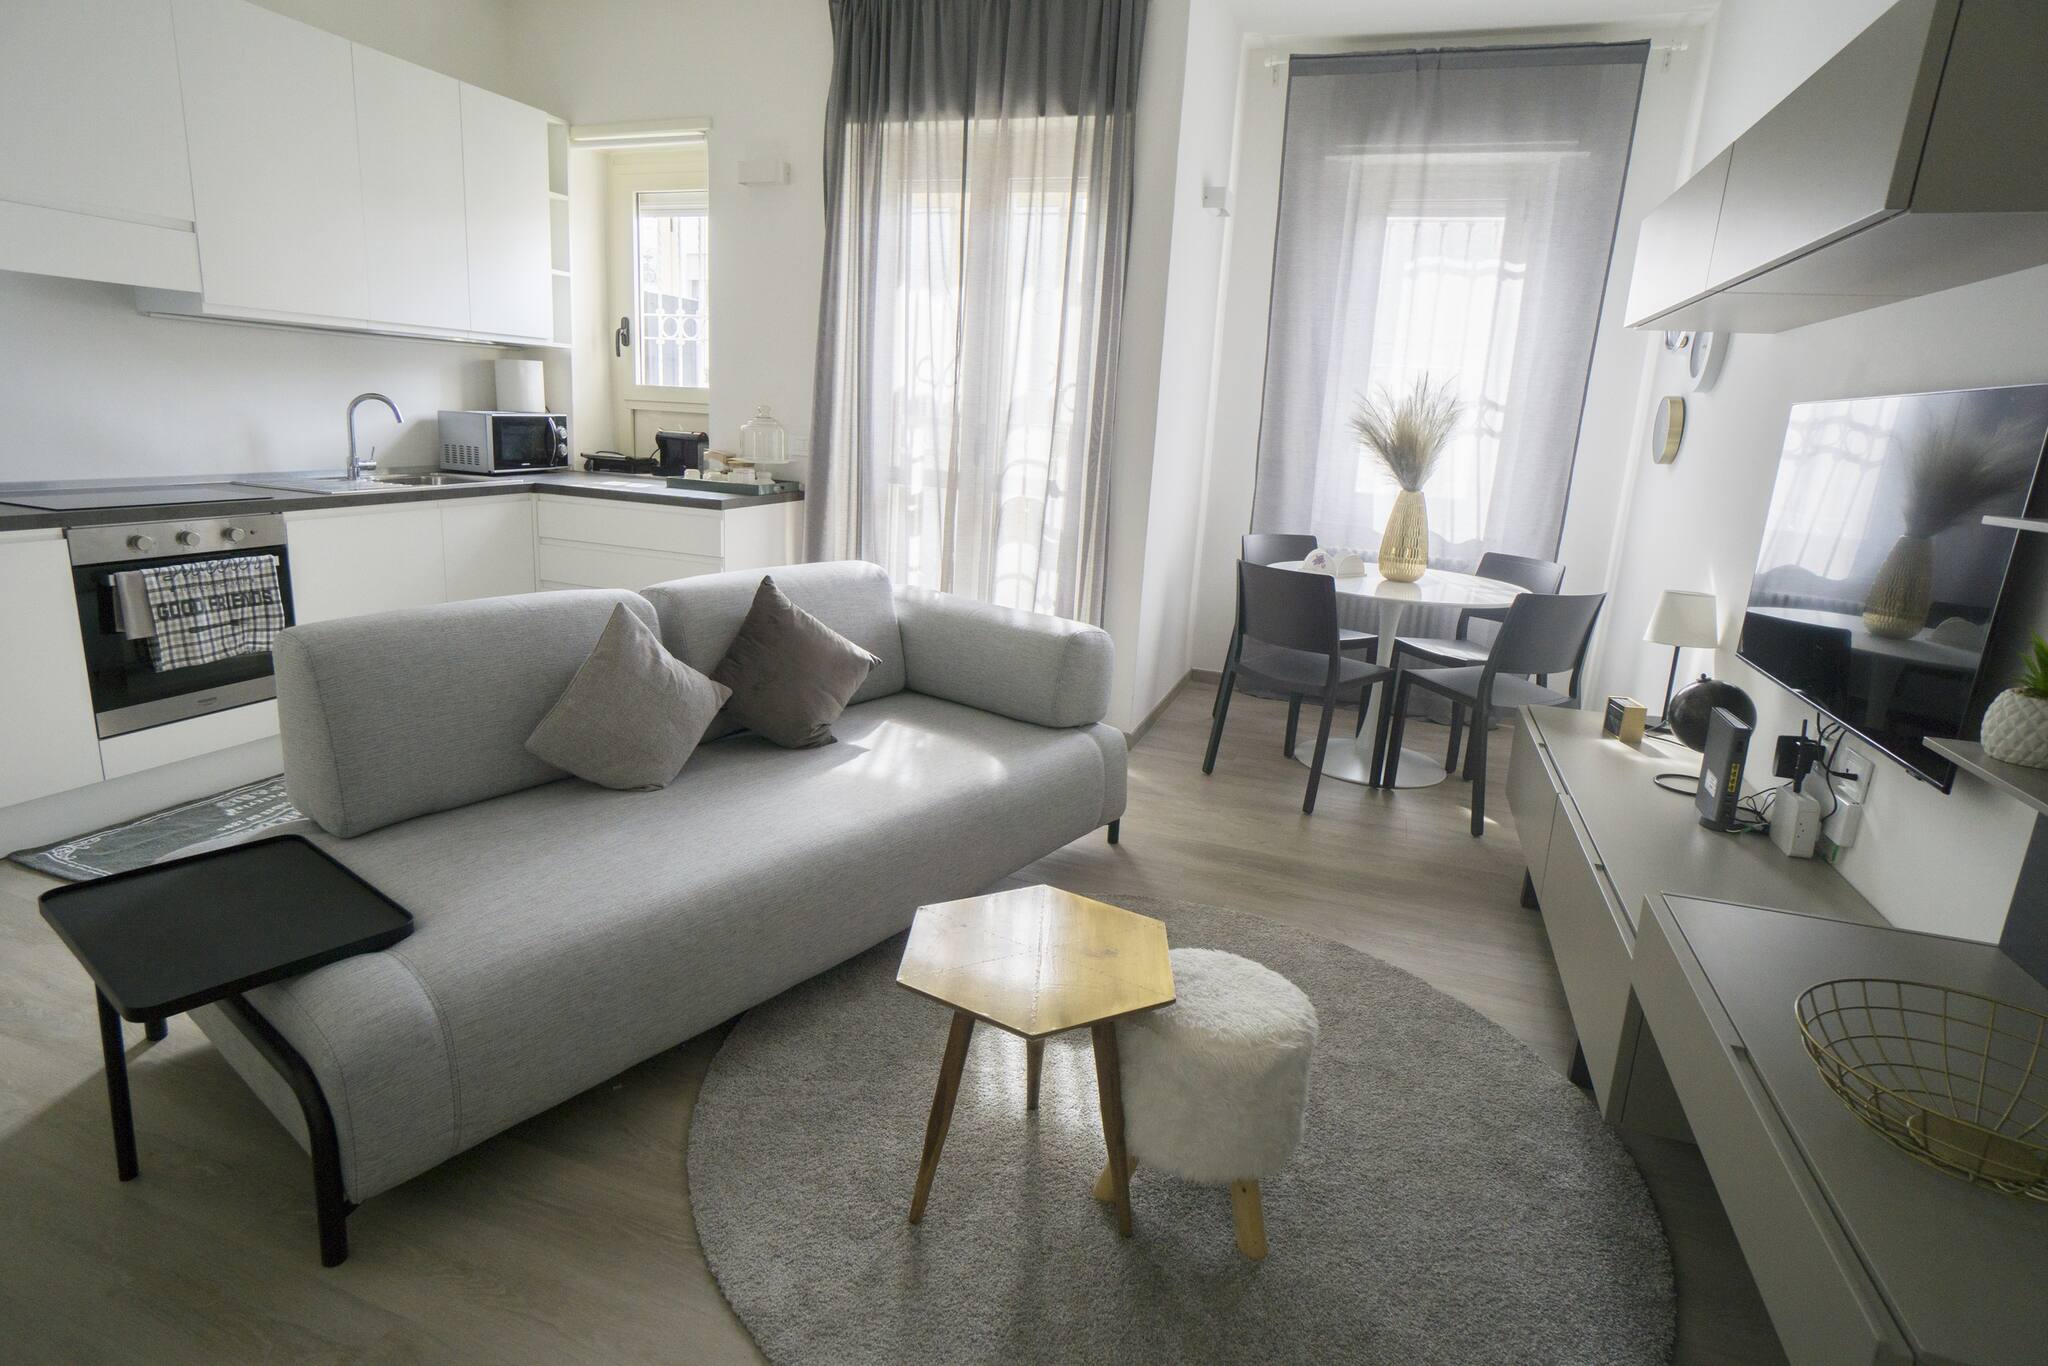 Property Image 1 - Charming and modern three-bedroom apartment in the heart of the city of Asti.